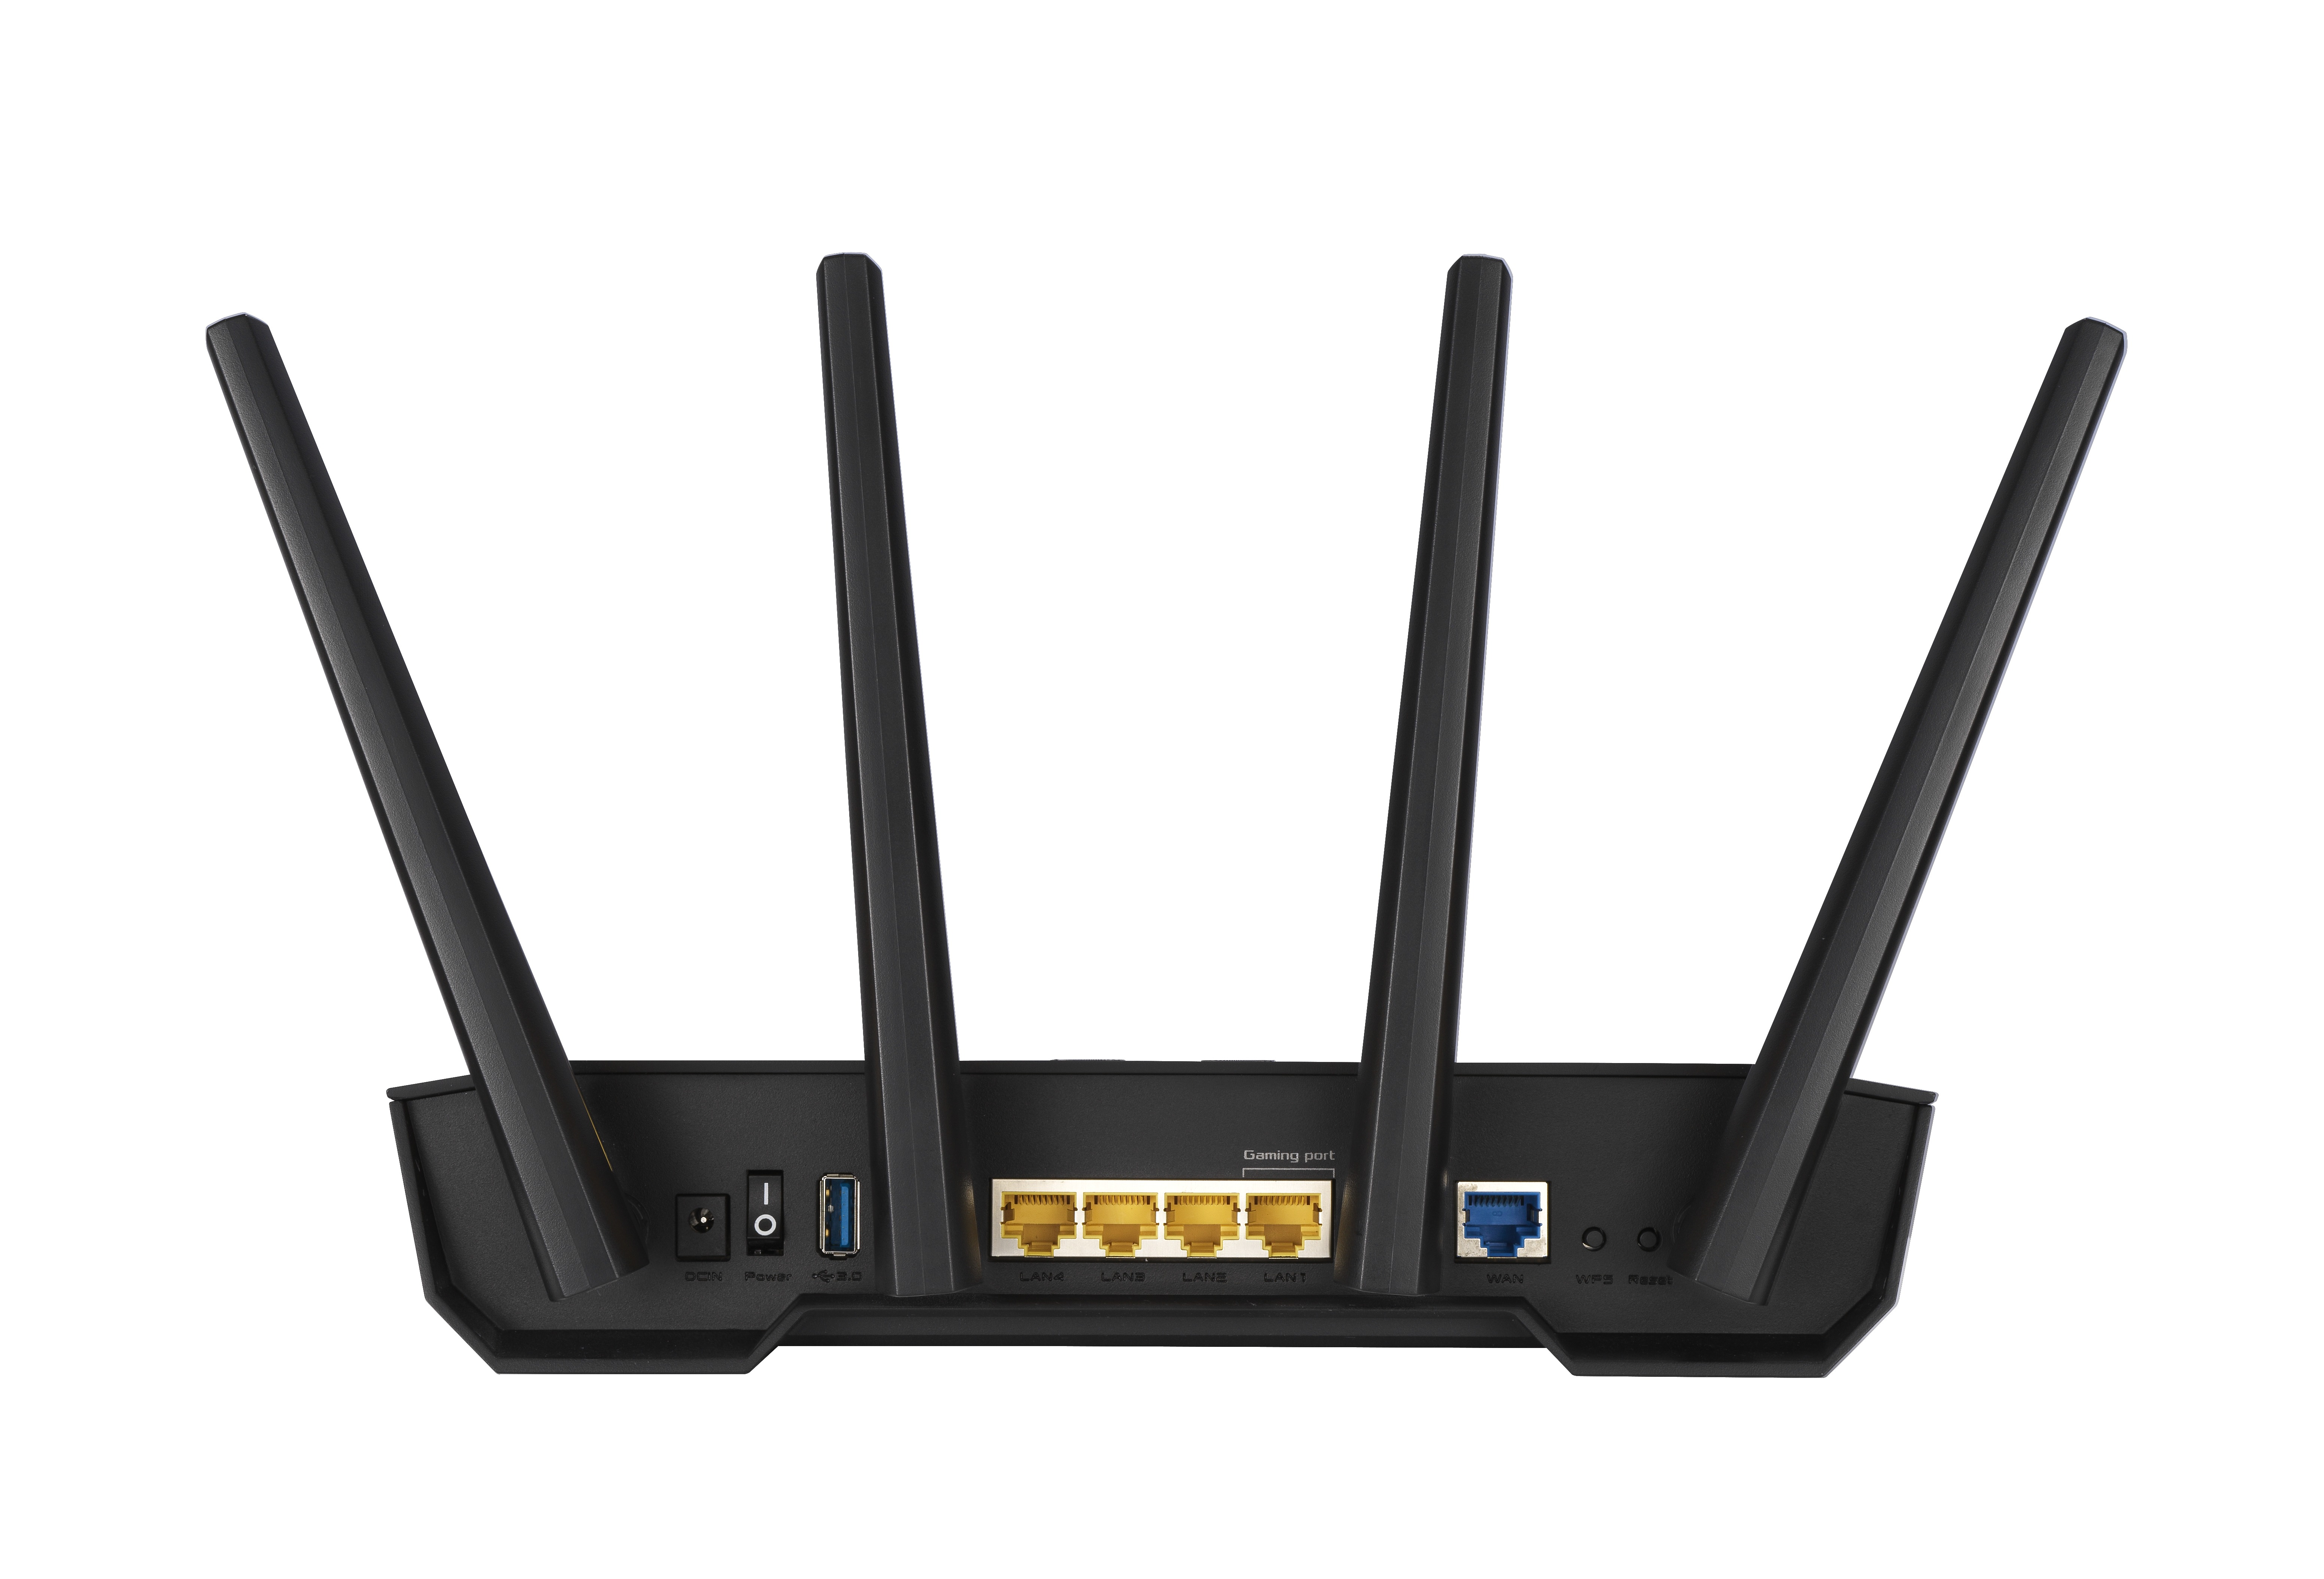 ASUS TUF Tabletop Gaming 2402 AX3000 V2 Mbit/s Router